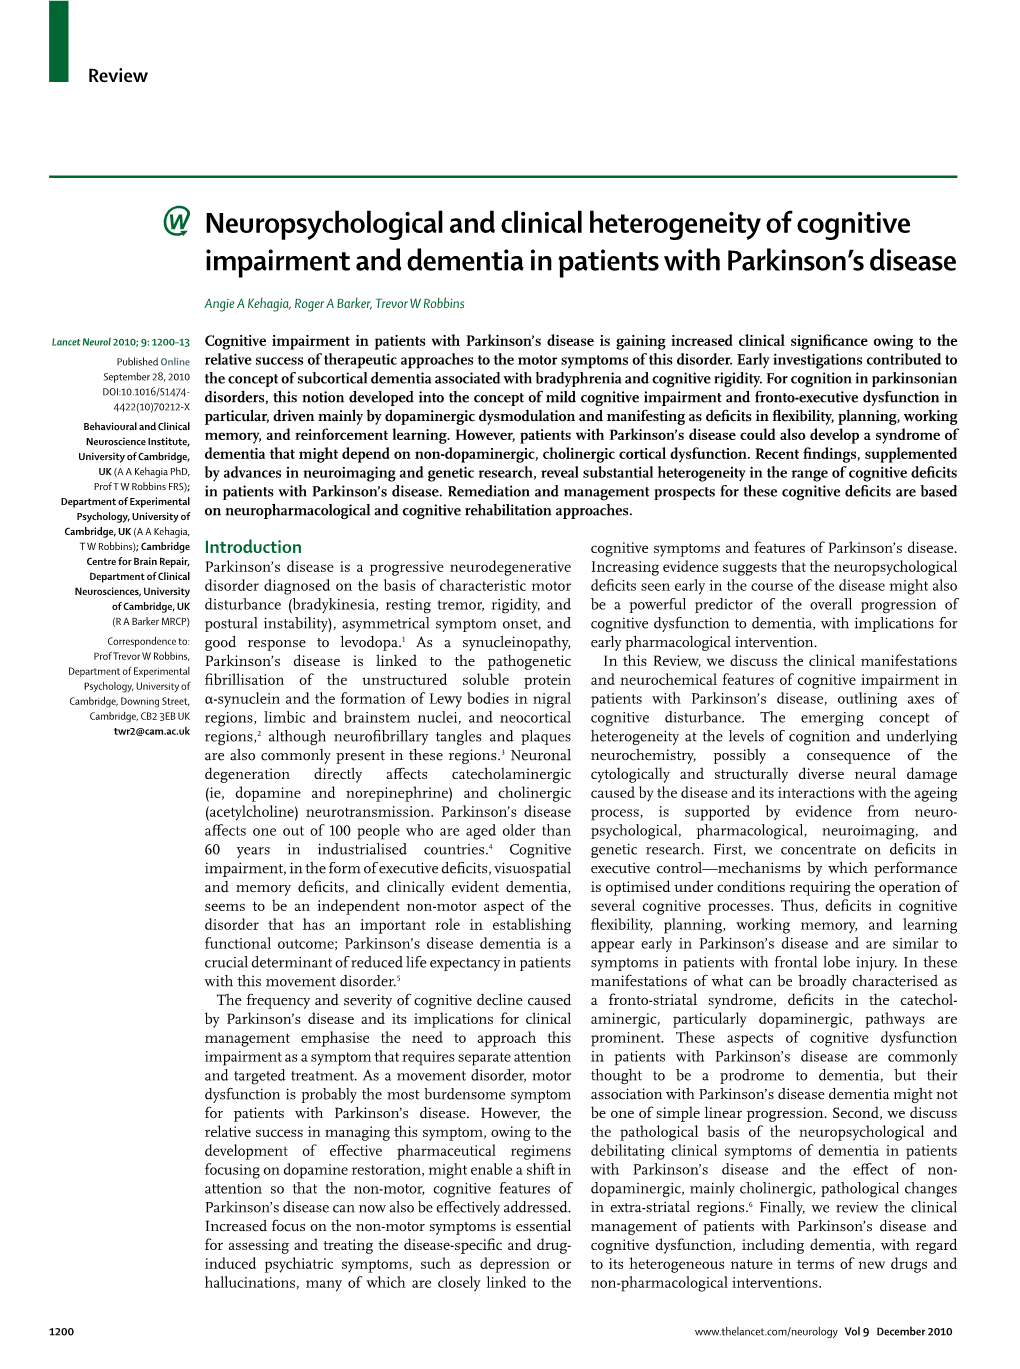 Neuropsychological and Clinical Heterogeneity of Cognitive Impairment and Dementia in Patients with Parkinson’S Disease